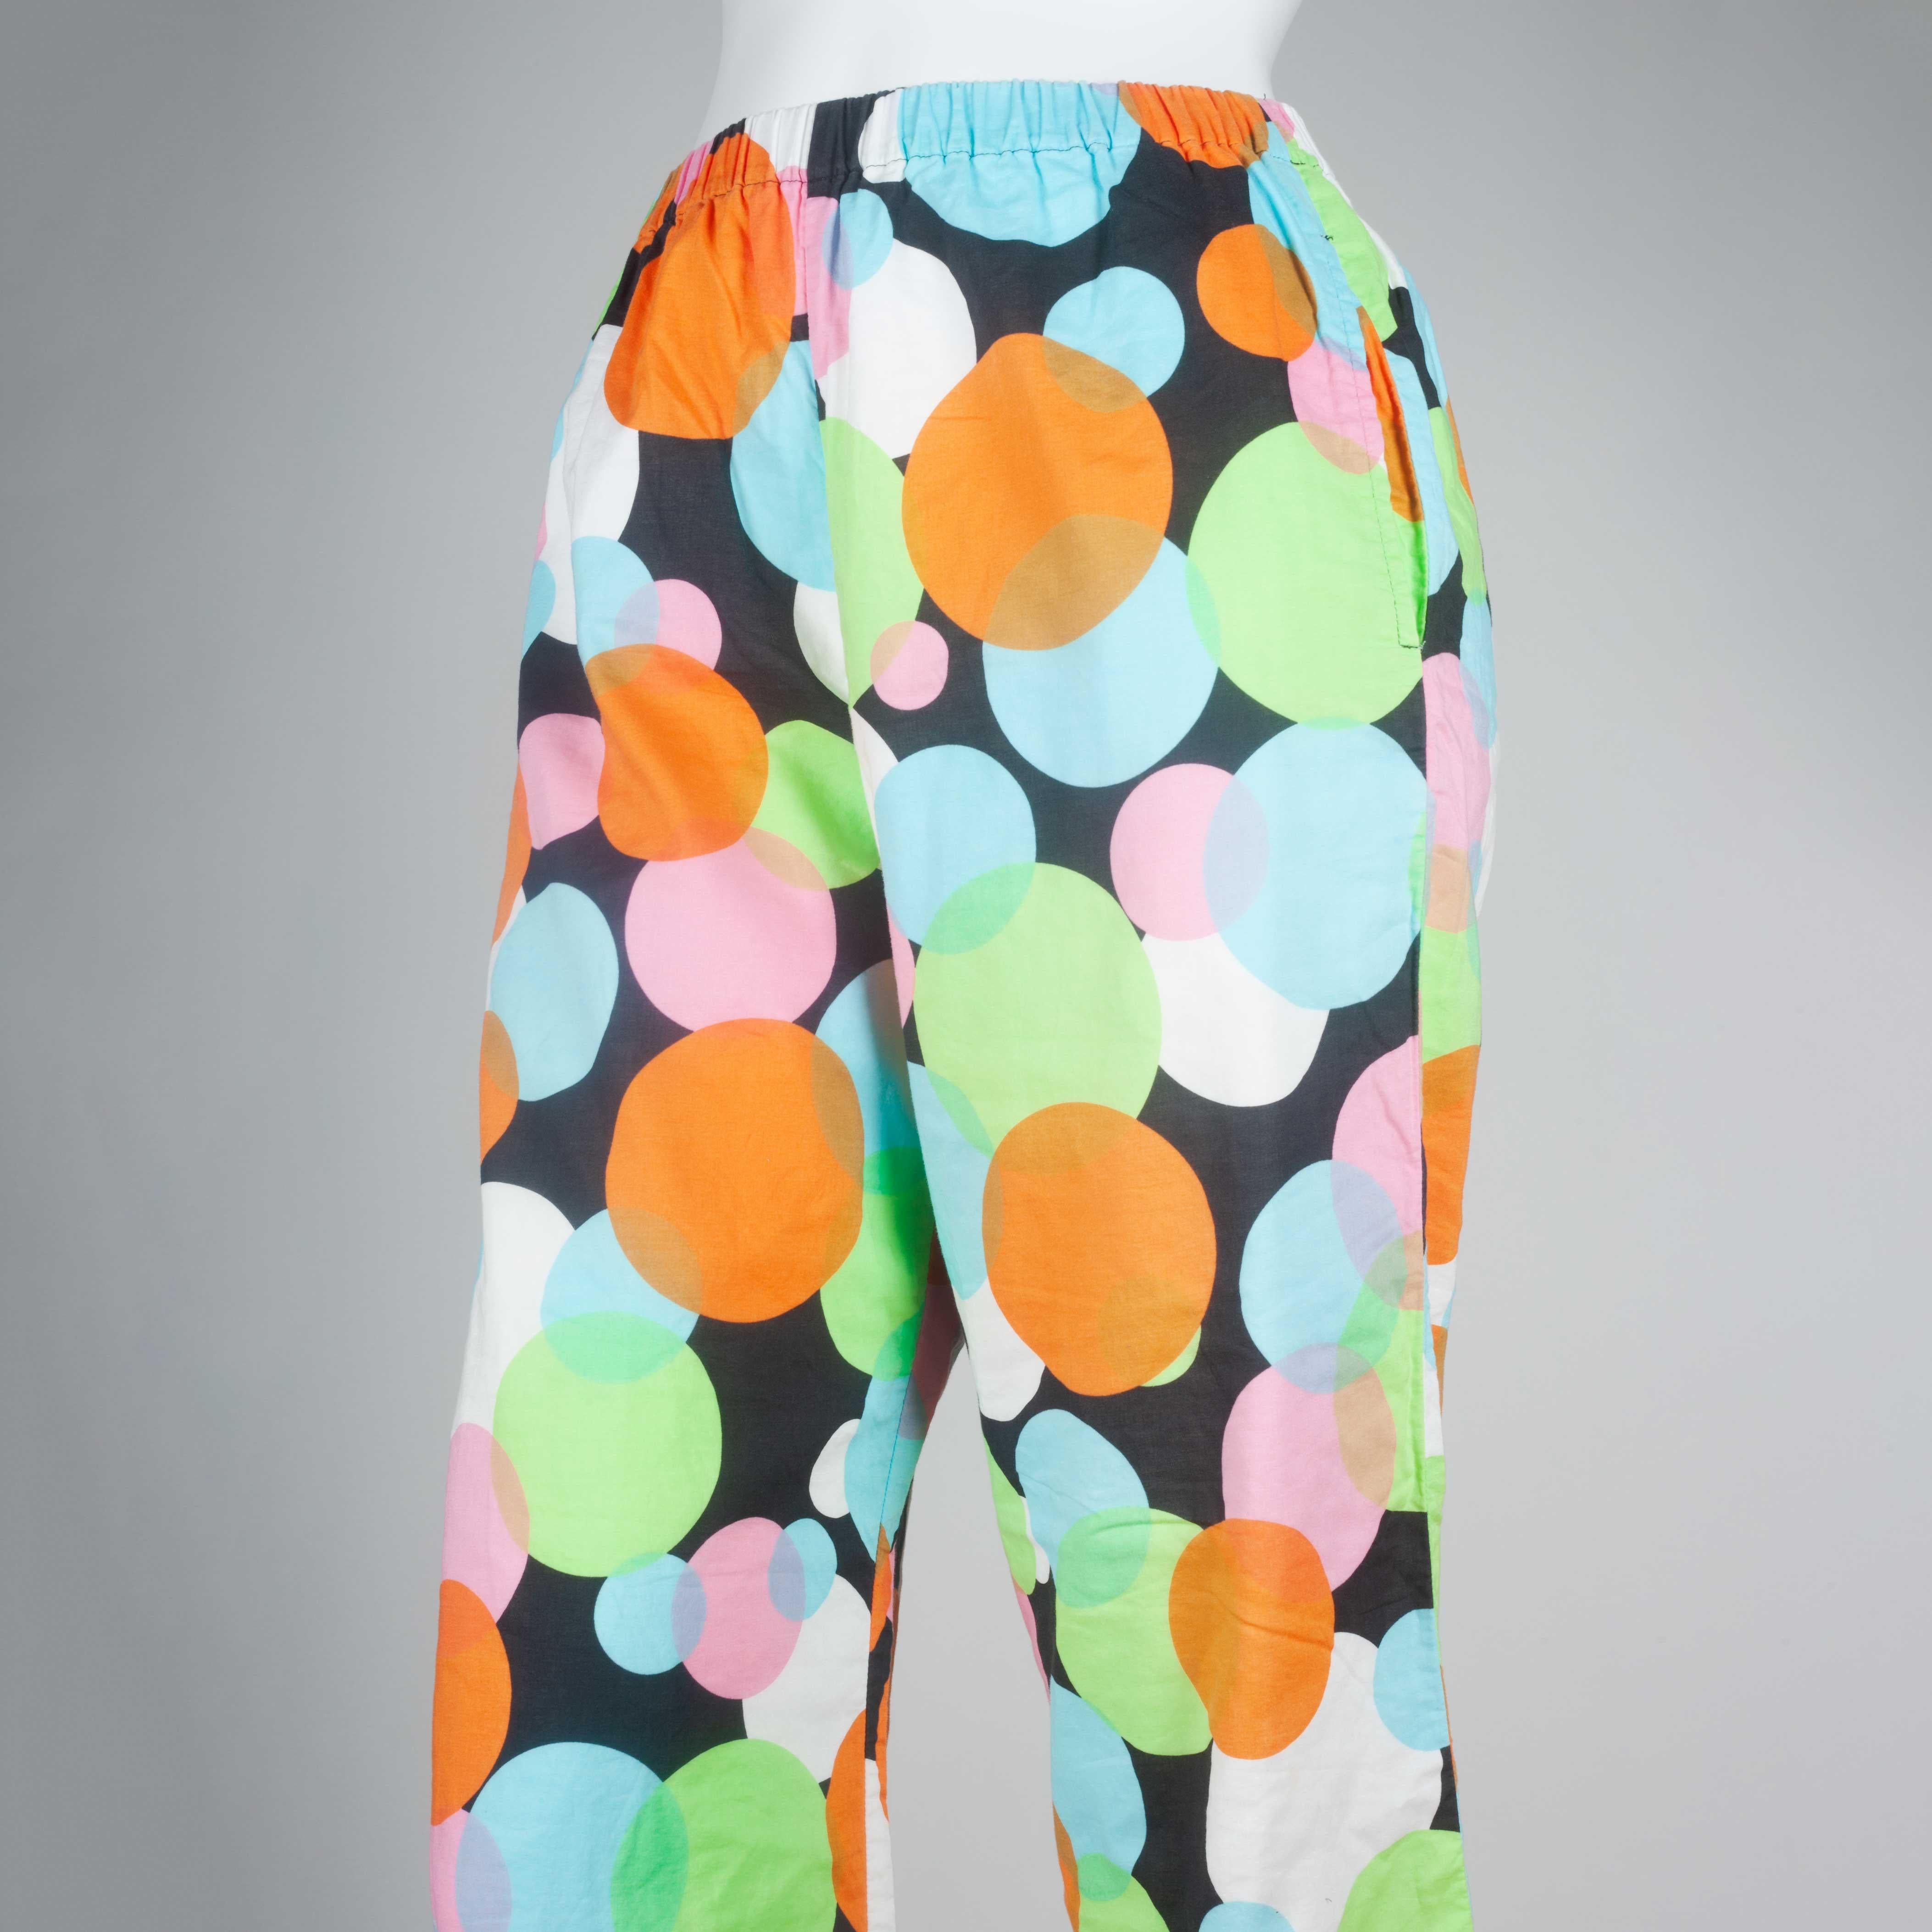 Comme des Garçons 2003 cotton pants from Japan with colorful circles in orange, blue, green, pink and white, all on a black background. Elastic waist. Delicately thin material gives a pleasant, light feel.

YEAR: 2003
MARKED SIZE: No size marked
US